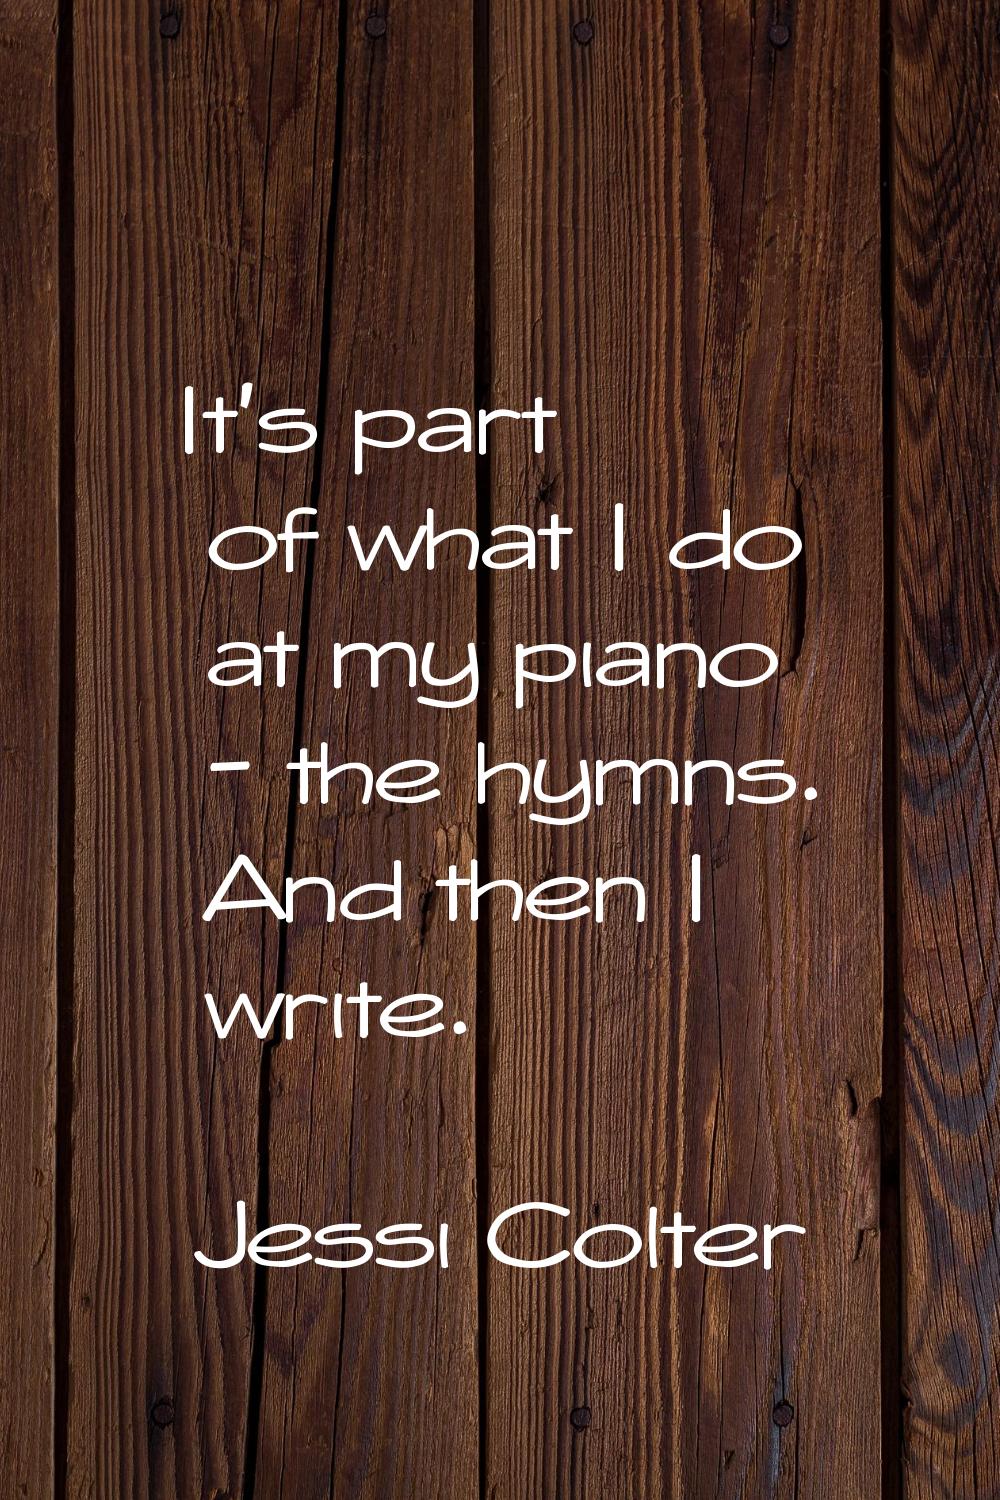 It's part of what I do at my piano - the hymns. And then I write.